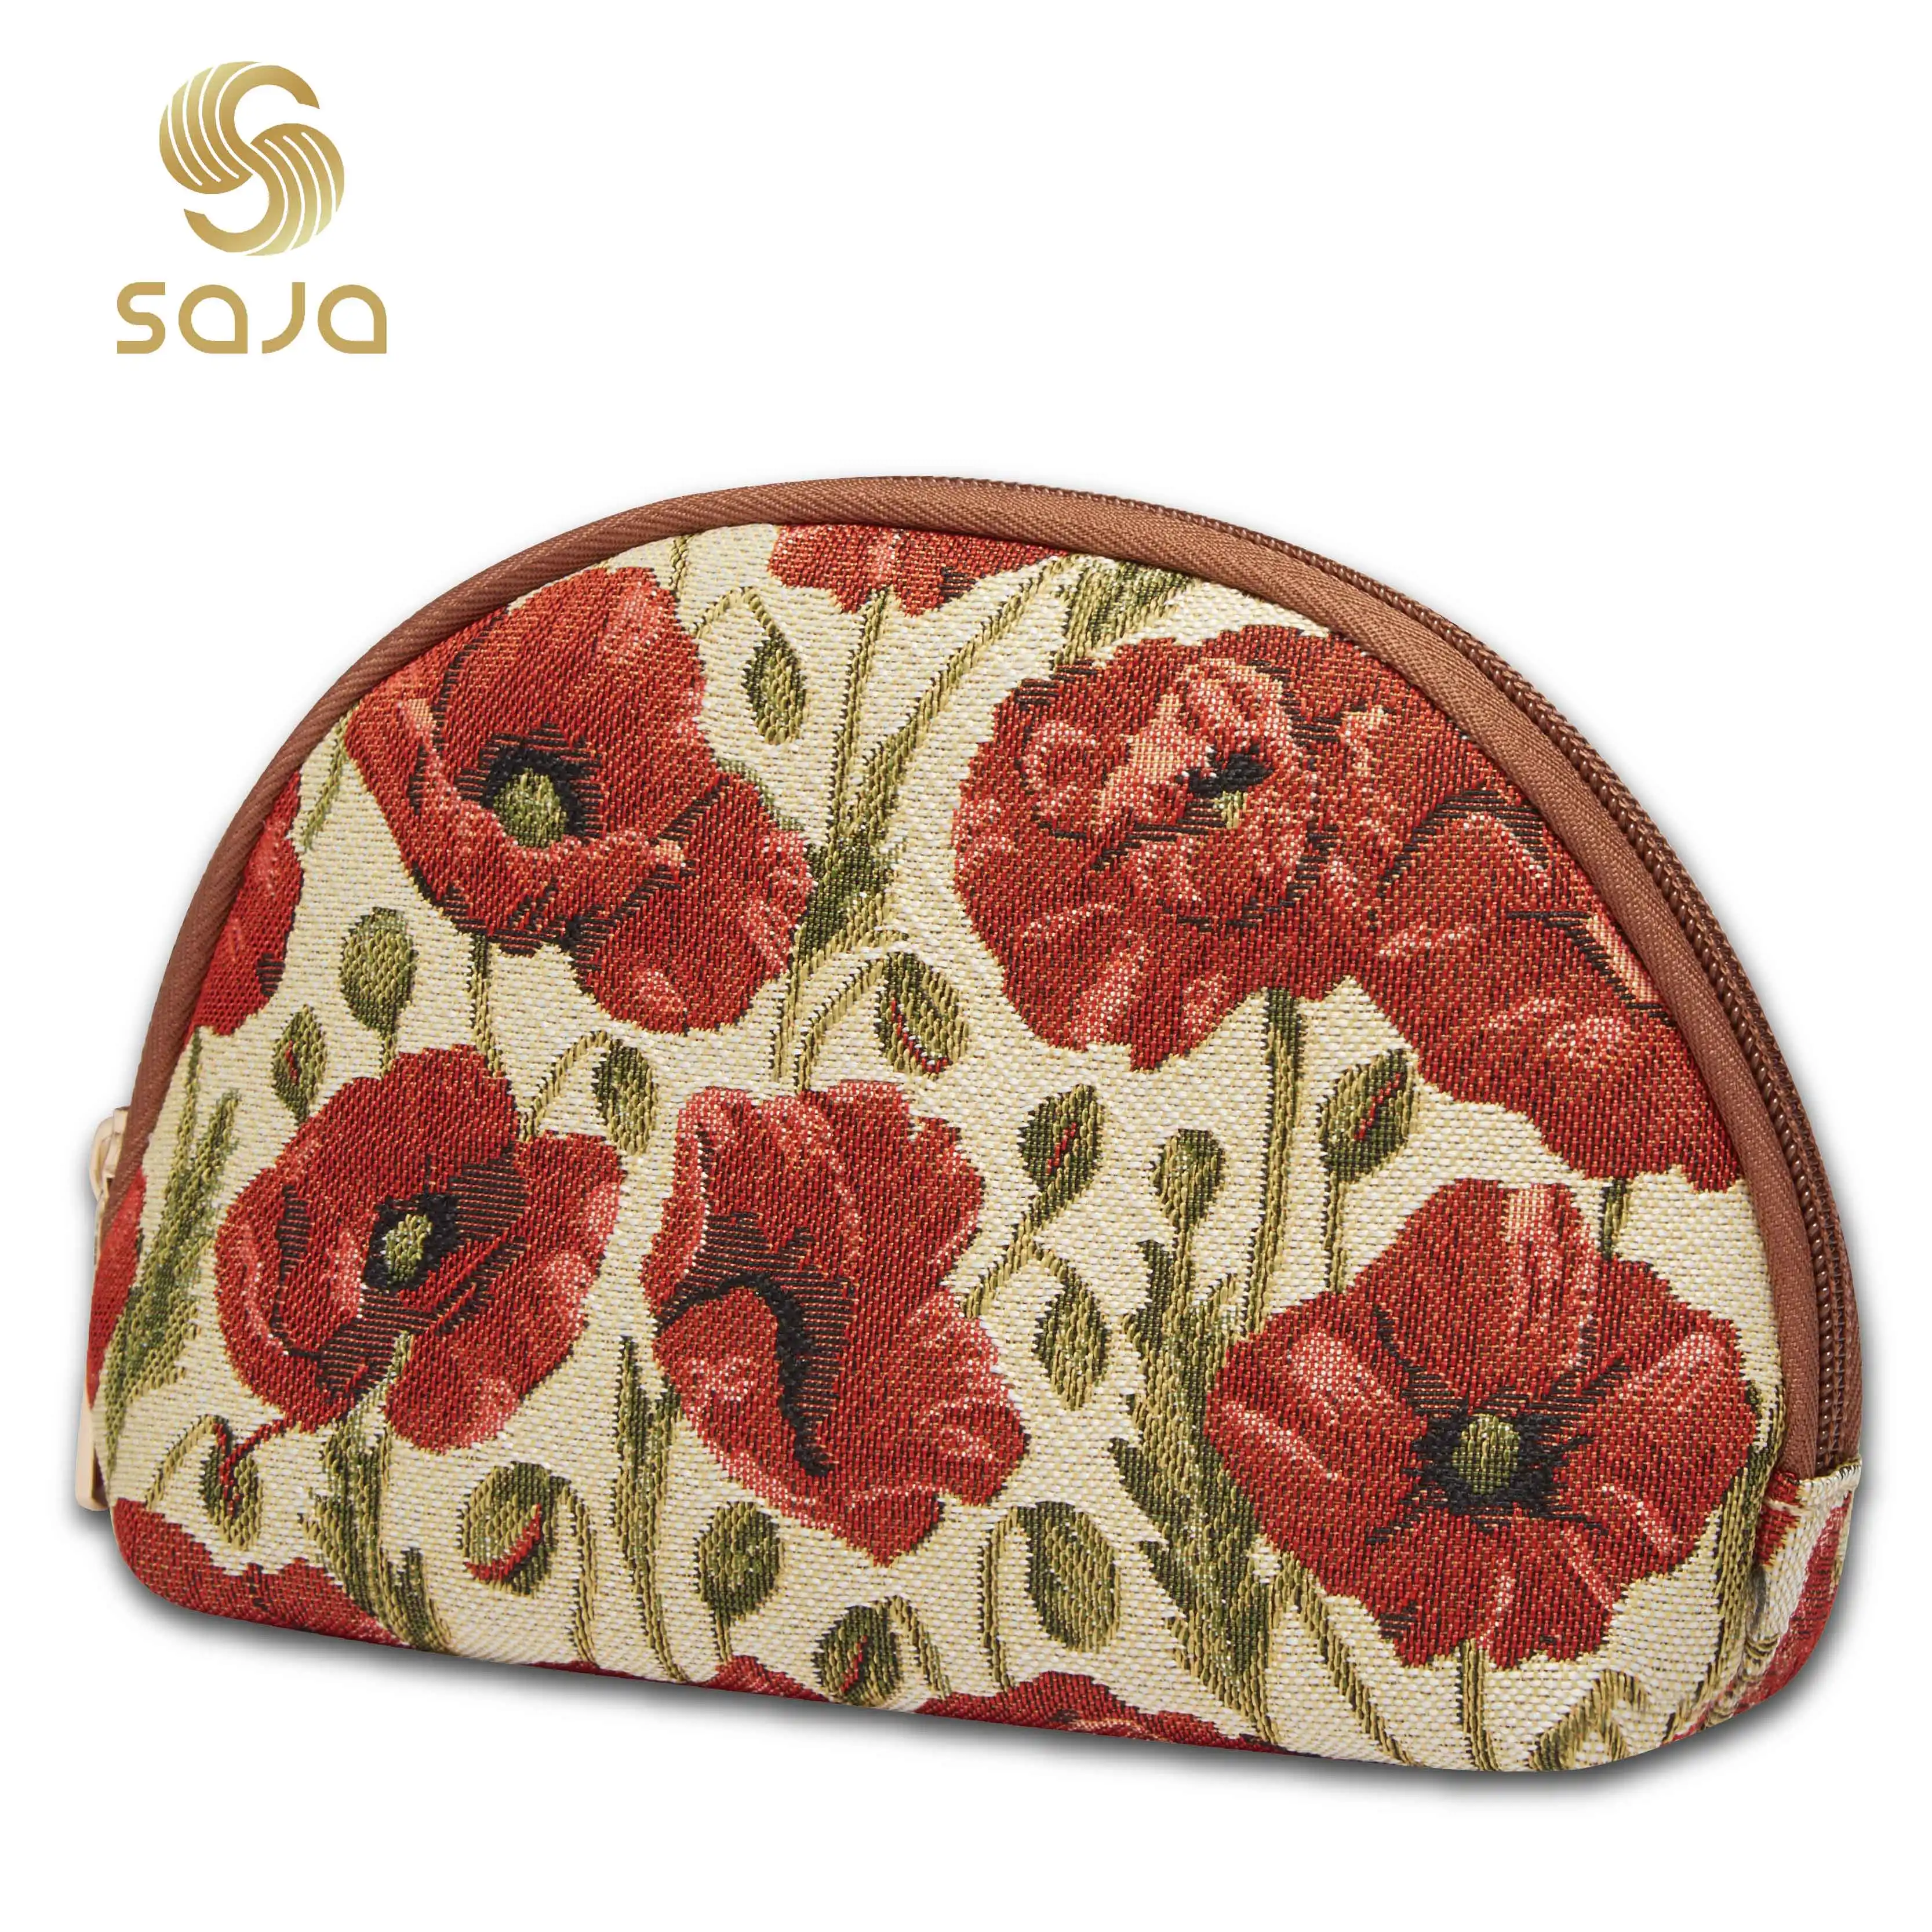 SAJA Wrist Bag Wristlets Coin Purses Women's Wallet Tapestry Bags Pouch Red  Poppy Flower Lipstick Credit Cards Holder For Girls